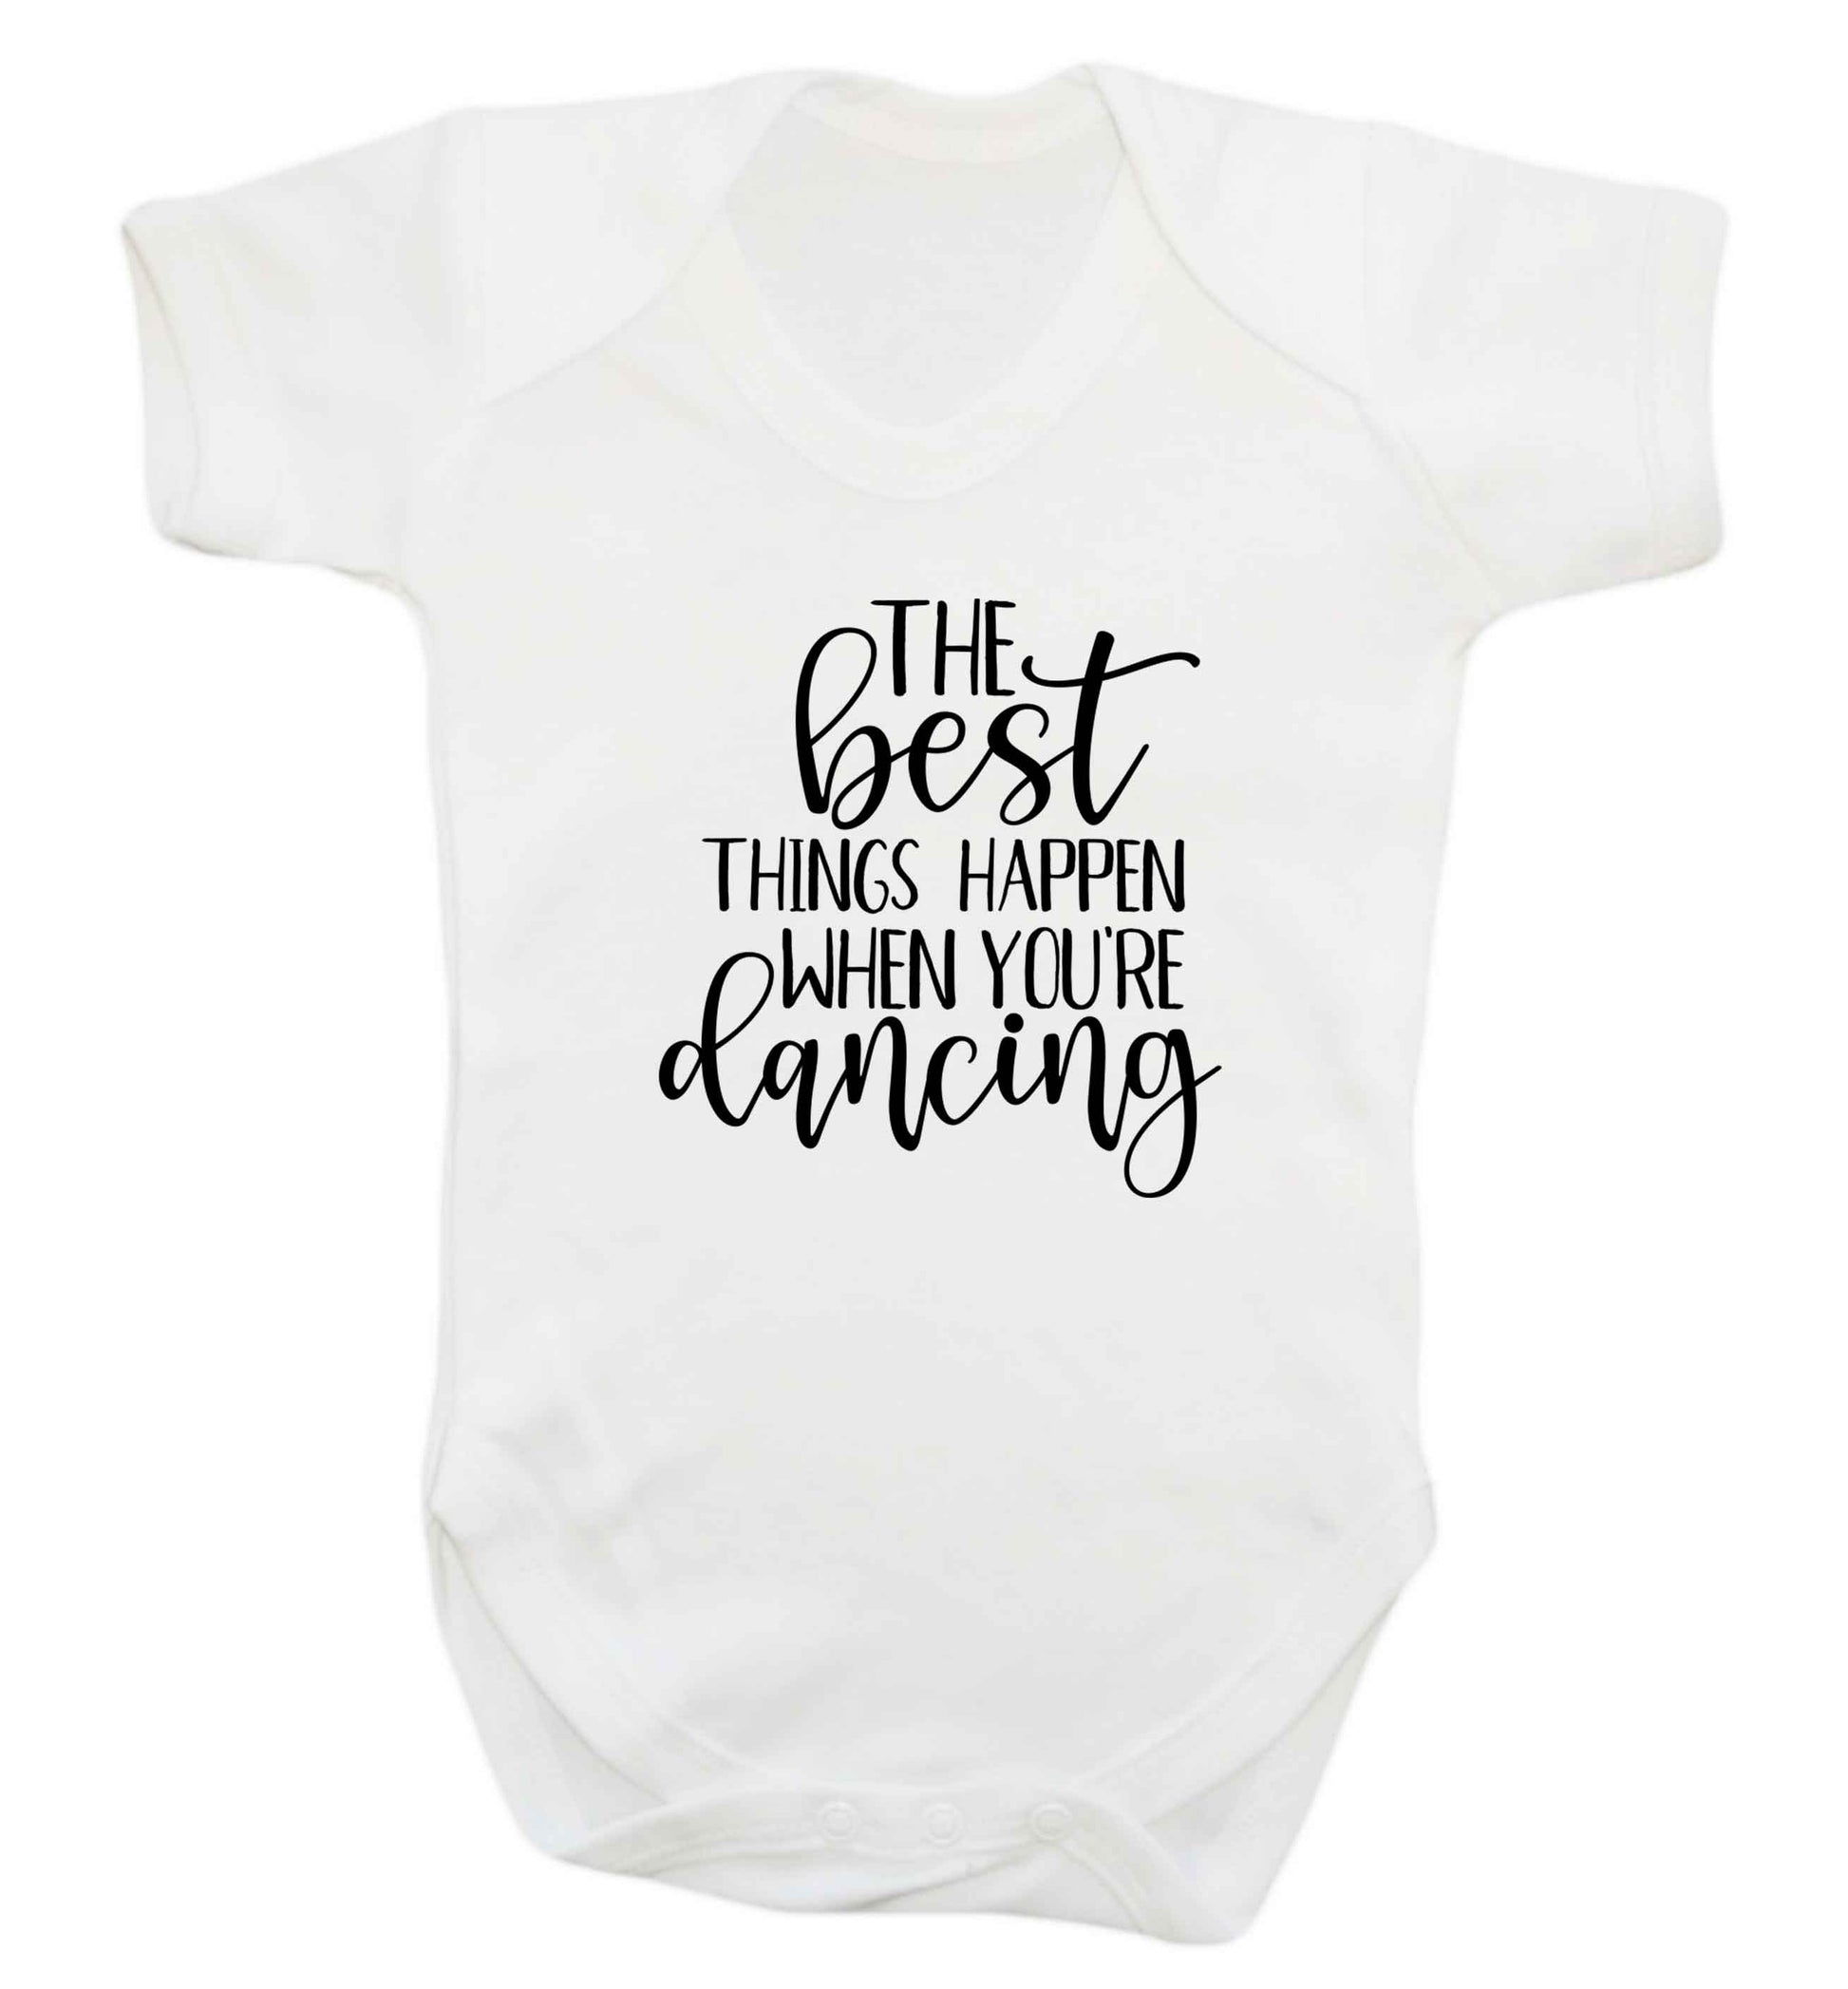 Best Things Happen Dancing baby vest white 18-24 months